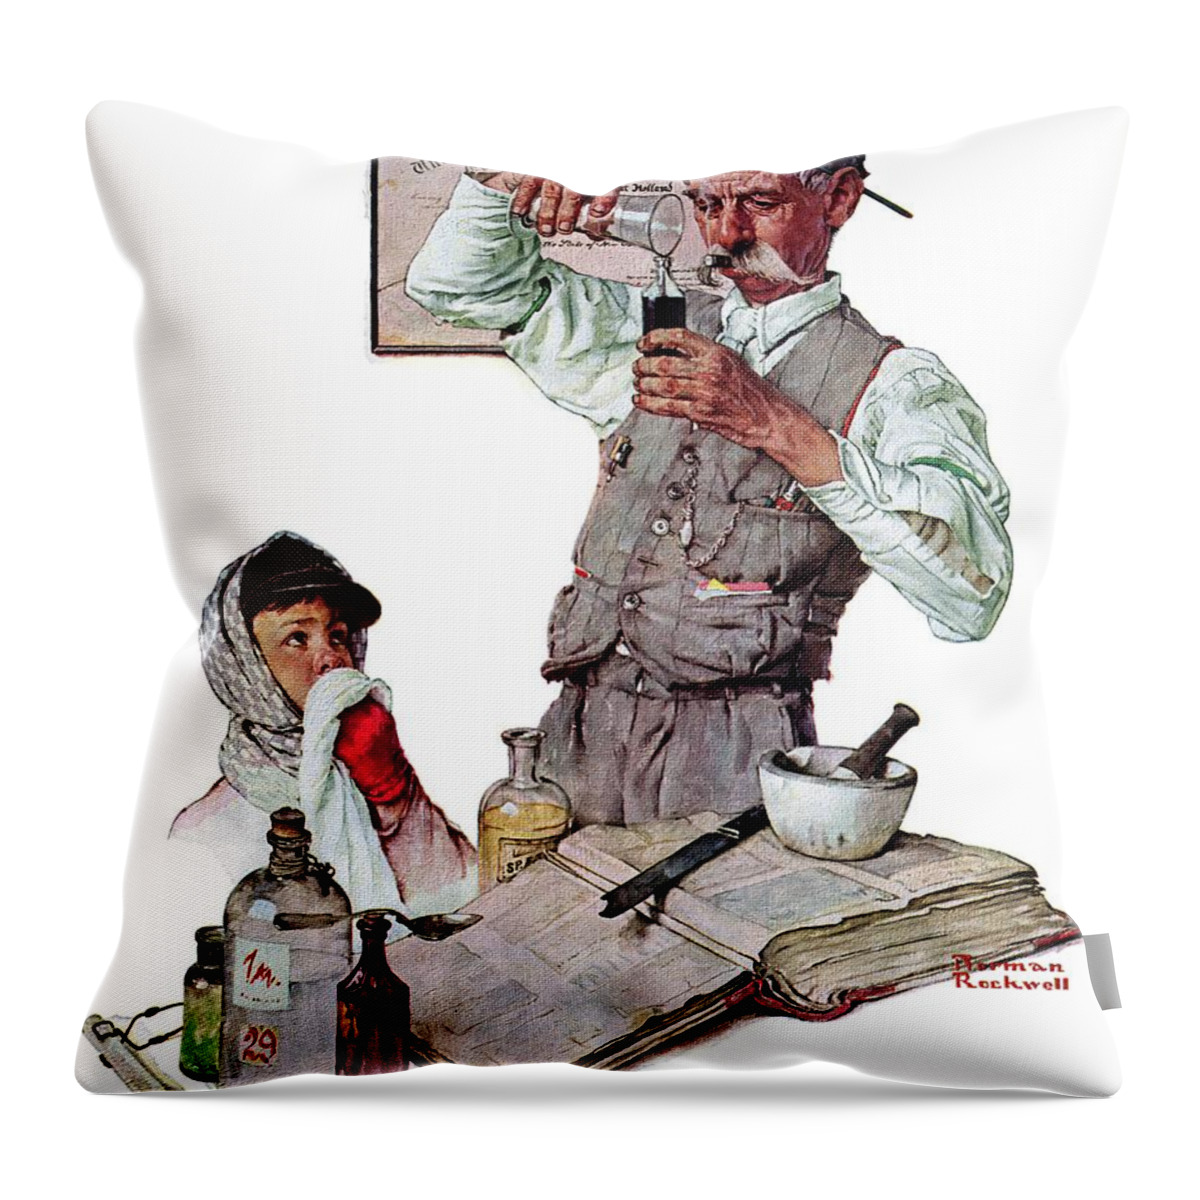 Boy Throw Pillow featuring the painting Pharmacist by Norman Rockwell